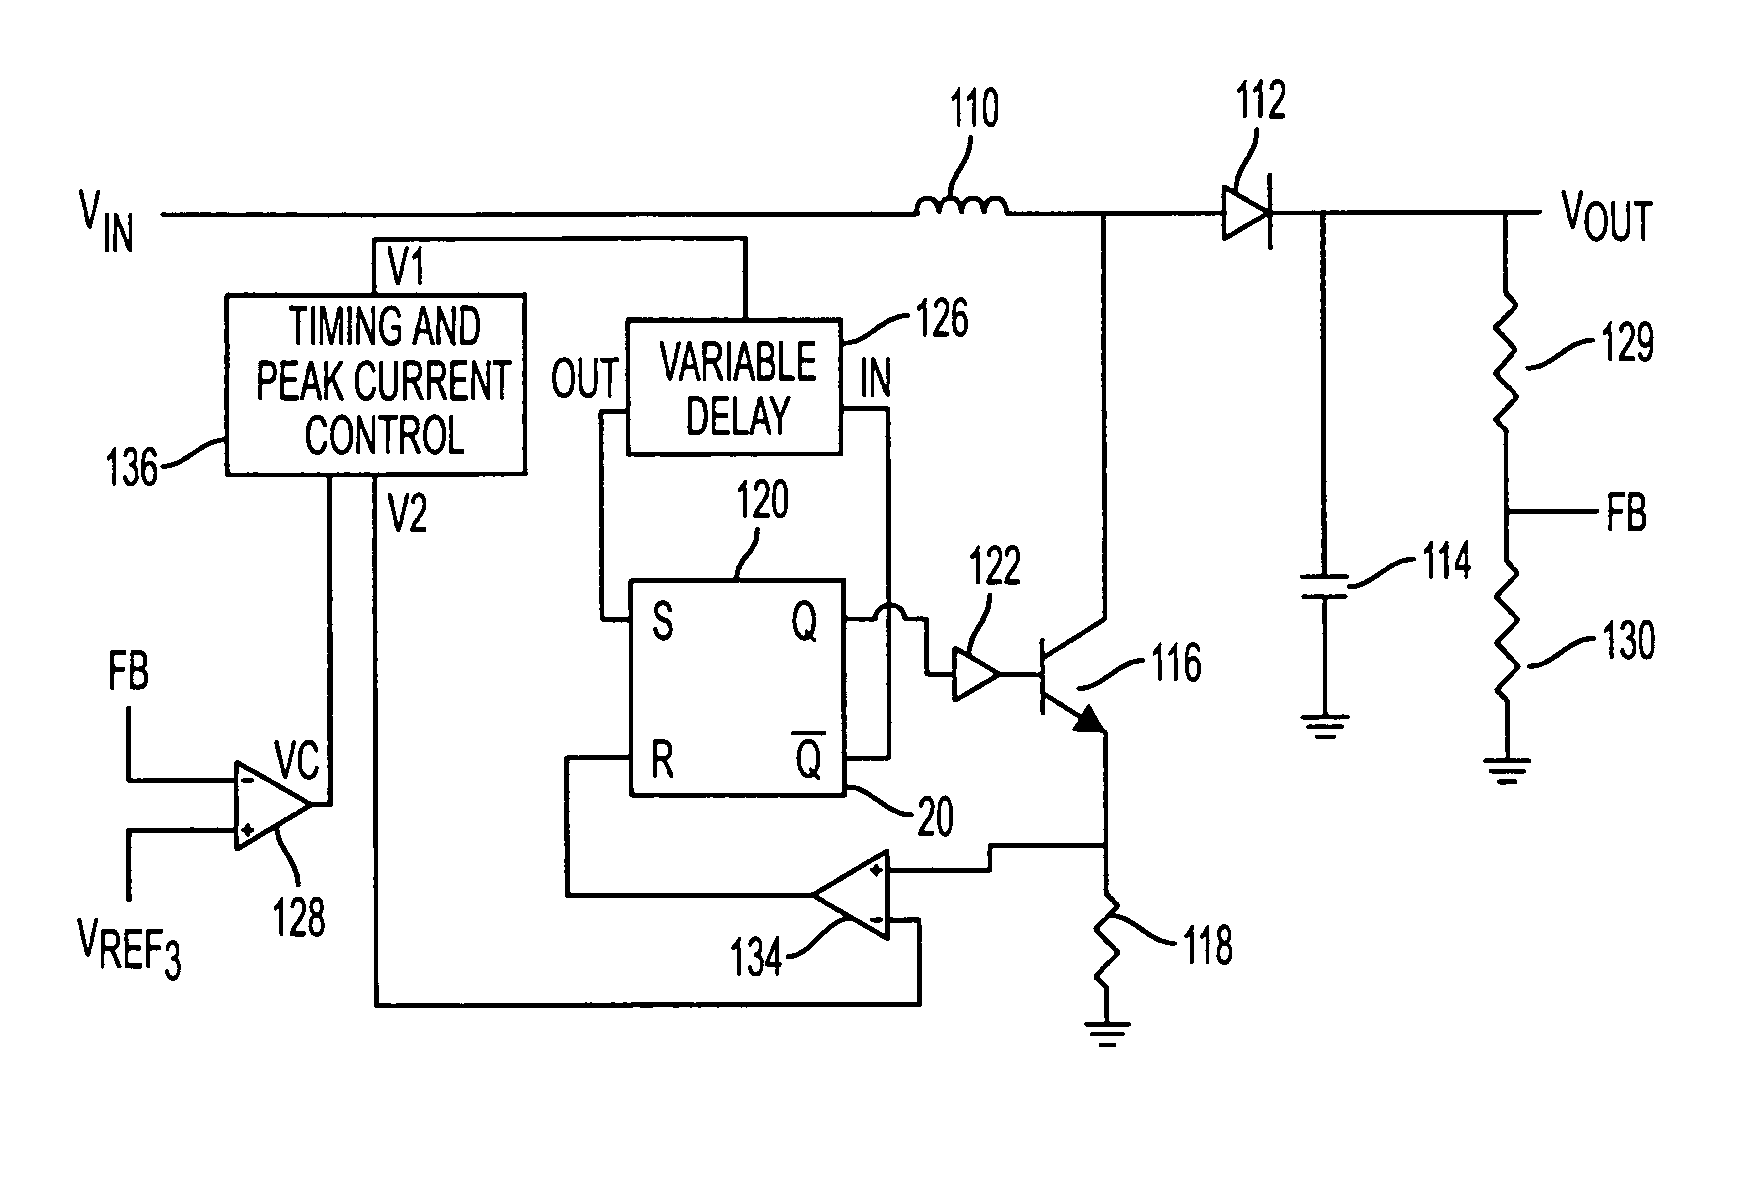 Switched converter with variable peak current and variable off-time control